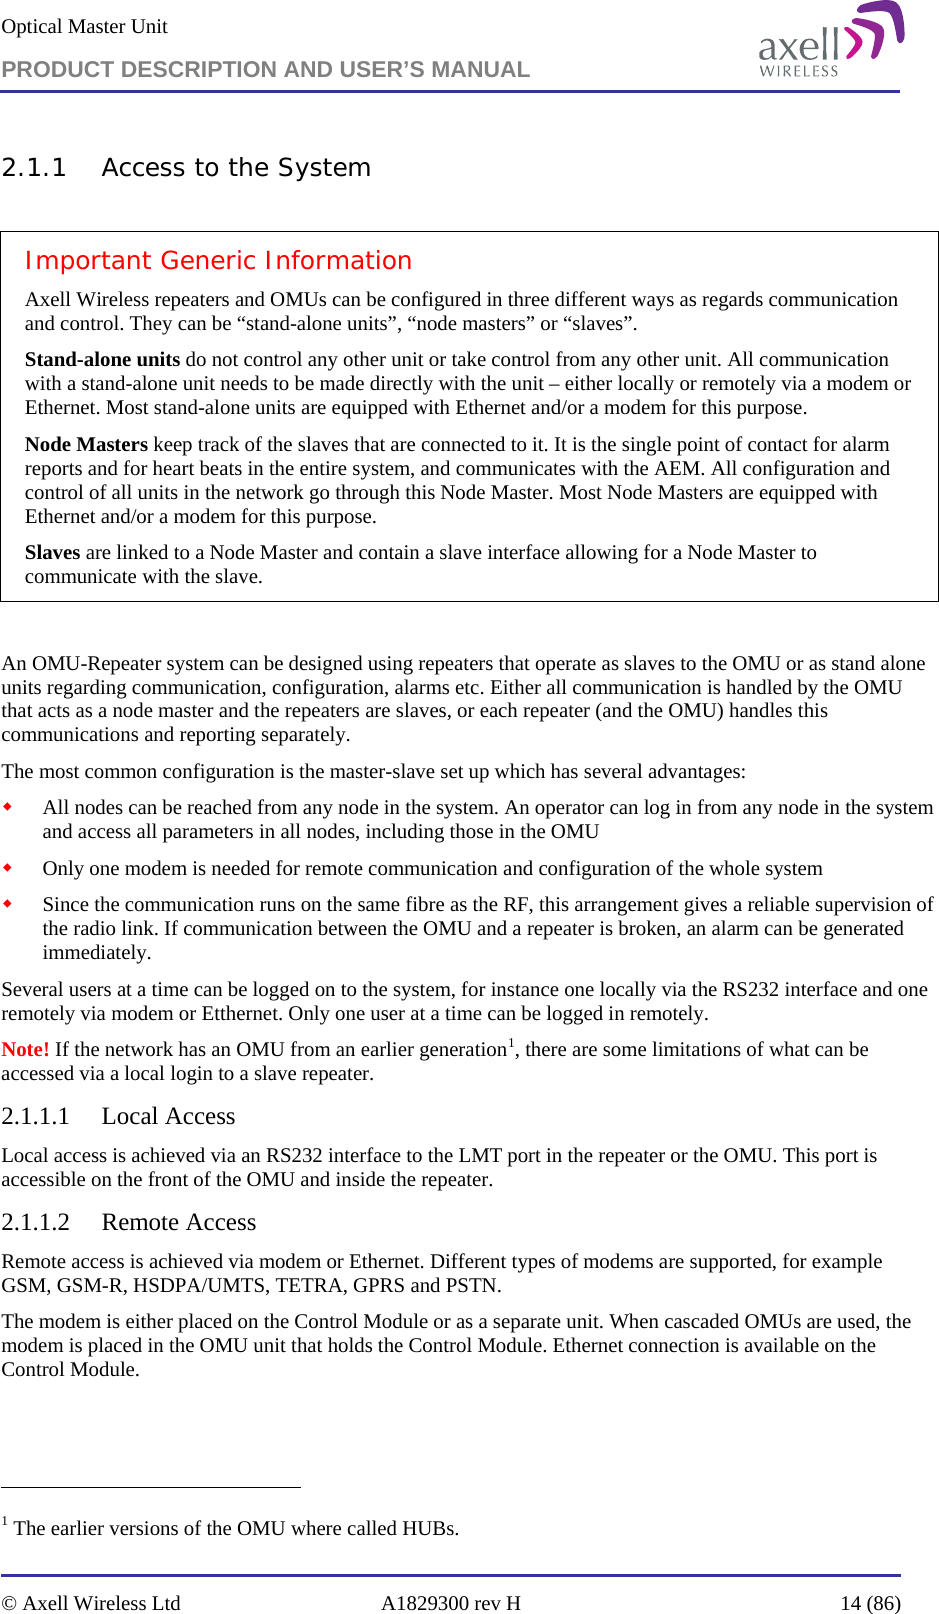 Optical Master Unit PRODUCT DESCRIPTION AND USER’S MANUAL   © Axell Wireless Ltd  A1829300 rev H  14 (86)  2.1.1 Access to the System  Important Generic Information Axell Wireless repeaters and OMUs can be configured in three different ways as regards communication and control. They can be “stand-alone units”, “node masters” or “slaves”. Stand-alone units do not control any other unit or take control from any other unit. All communication with a stand-alone unit needs to be made directly with the unit – either locally or remotely via a modem or Ethernet. Most stand-alone units are equipped with Ethernet and/or a modem for this purpose. Node Masters keep track of the slaves that are connected to it. It is the single point of contact for alarm reports and for heart beats in the entire system, and communicates with the AEM. All configuration and control of all units in the network go through this Node Master. Most Node Masters are equipped with Ethernet and/or a modem for this purpose. Slaves are linked to a Node Master and contain a slave interface allowing for a Node Master to communicate with the slave.   An OMU-Repeater system can be designed using repeaters that operate as slaves to the OMU or as stand alone units regarding communication, configuration, alarms etc. Either all communication is handled by the OMU that acts as a node master and the repeaters are slaves, or each repeater (and the OMU) handles this communications and reporting separately.  The most common configuration is the master-slave set up which has several advantages:  All nodes can be reached from any node in the system. An operator can log in from any node in the system and access all parameters in all nodes, including those in the OMU  Only one modem is needed for remote communication and configuration of the whole system  Since the communication runs on the same fibre as the RF, this arrangement gives a reliable supervision of the radio link. If communication between the OMU and a repeater is broken, an alarm can be generated immediately. Several users at a time can be logged on to the system, for instance one locally via the RS232 interface and one remotely via modem or Etthernet. Only one user at a time can be logged in remotely. Note! If the network has an OMU from an earlier generation1, there are some limitations of what can be accessed via a local login to a slave repeater. 2.1.1.1 Local Access Local access is achieved via an RS232 interface to the LMT port in the repeater or the OMU. This port is accessible on the front of the OMU and inside the repeater.  2.1.1.2 Remote Access Remote access is achieved via modem or Ethernet. Different types of modems are supported, for example GSM, GSM-R, HSDPA/UMTS, TETRA, GPRS and PSTN.  The modem is either placed on the Control Module or as a separate unit. When cascaded OMUs are used, the modem is placed in the OMU unit that holds the Control Module. Ethernet connection is available on the Control Module.                                                            1 The earlier versions of the OMU where called HUBs. 